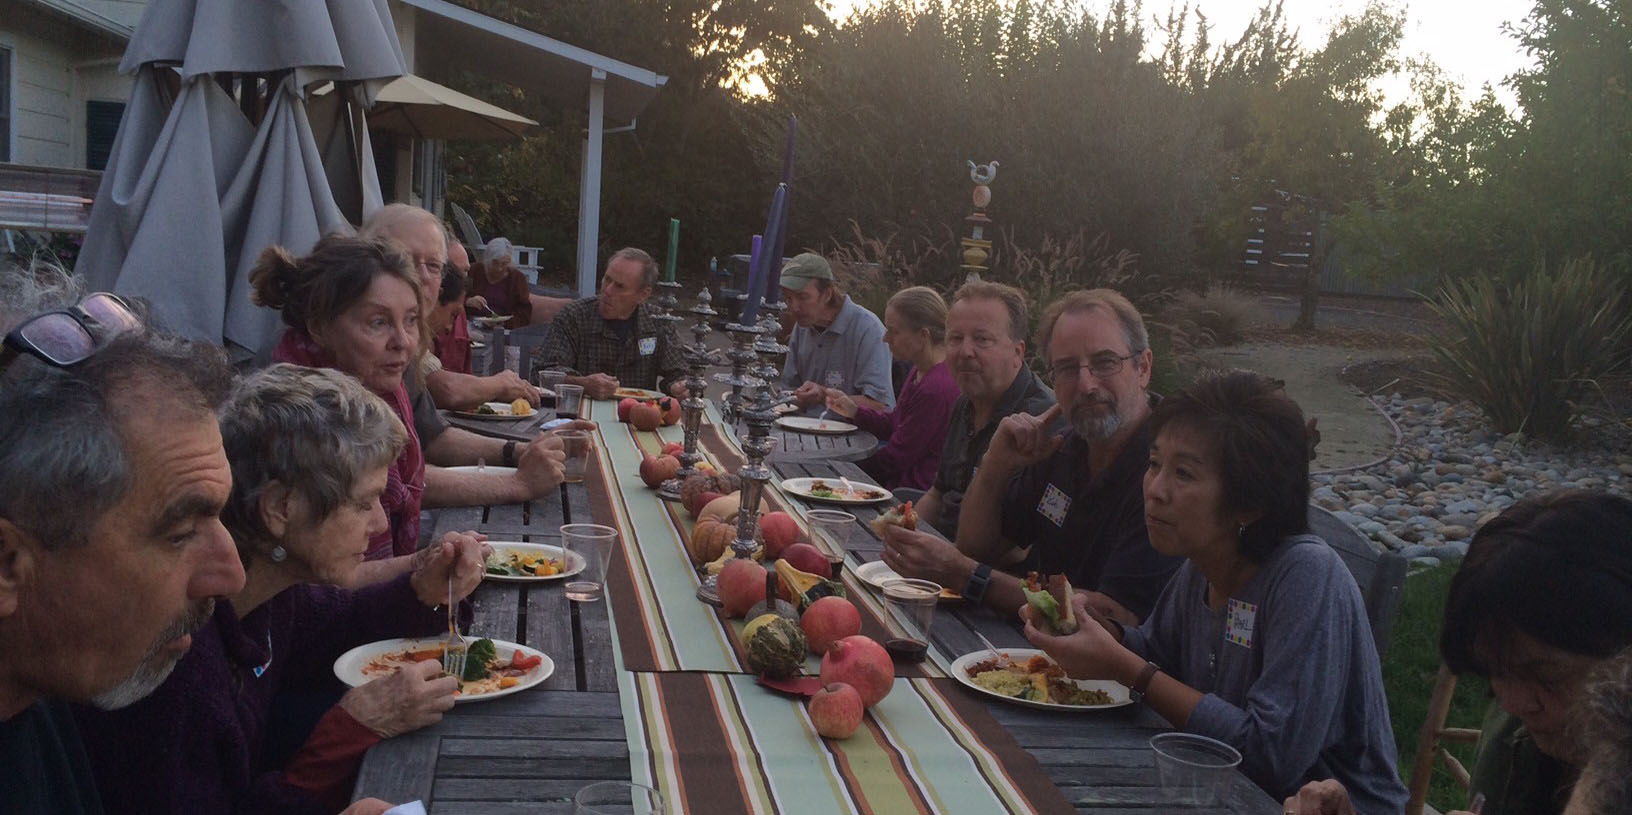 The Gravenstein Apple Core enjoys an alfresco dinner at the end of the successful 2014 season.